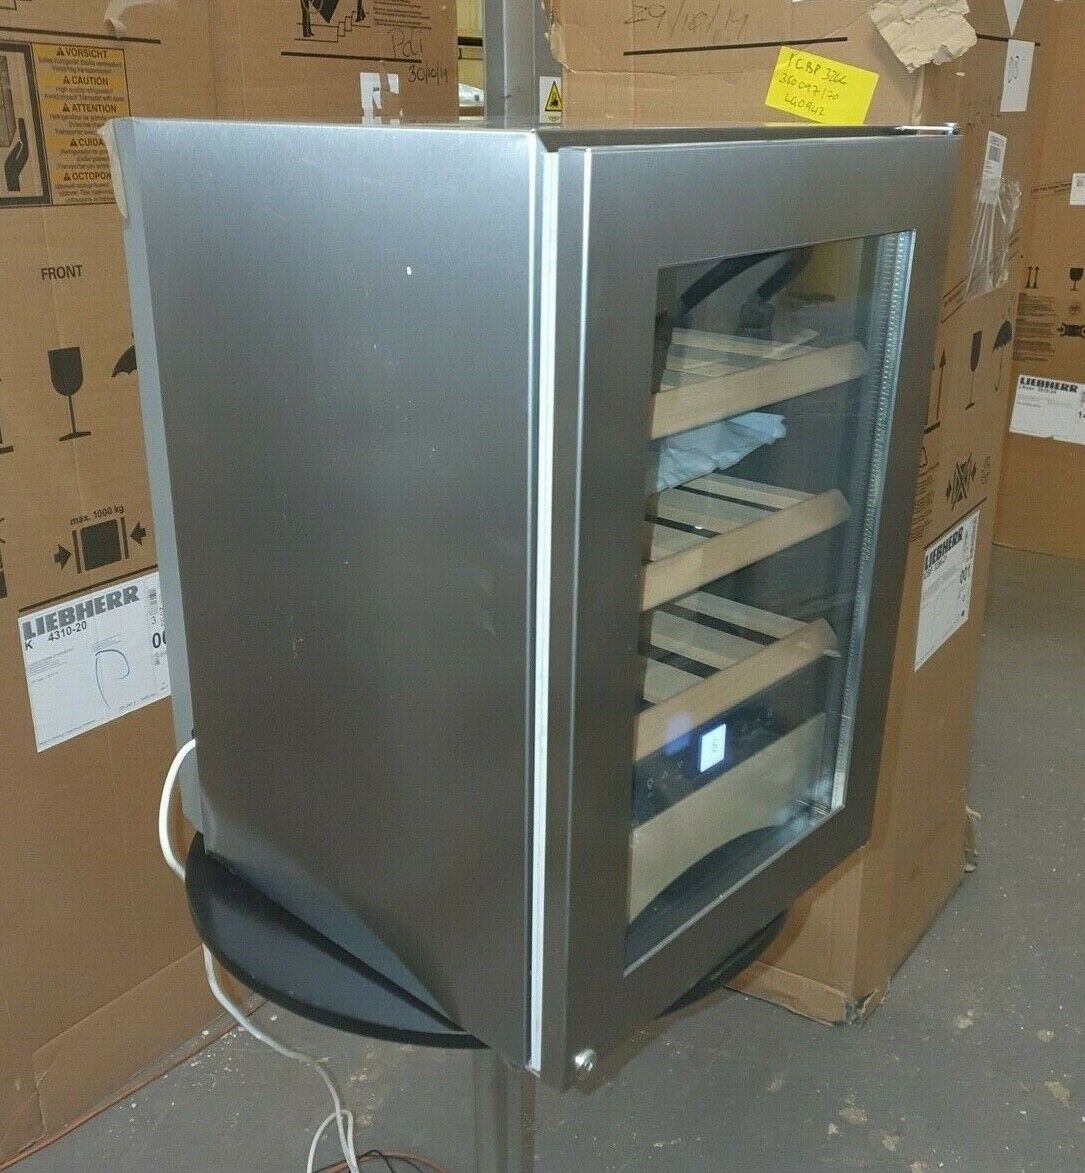 Liebherr WKES 653 43cm Freestanding Grand Cru Wine Cooler STAINLESS STEEL The Appliance Company